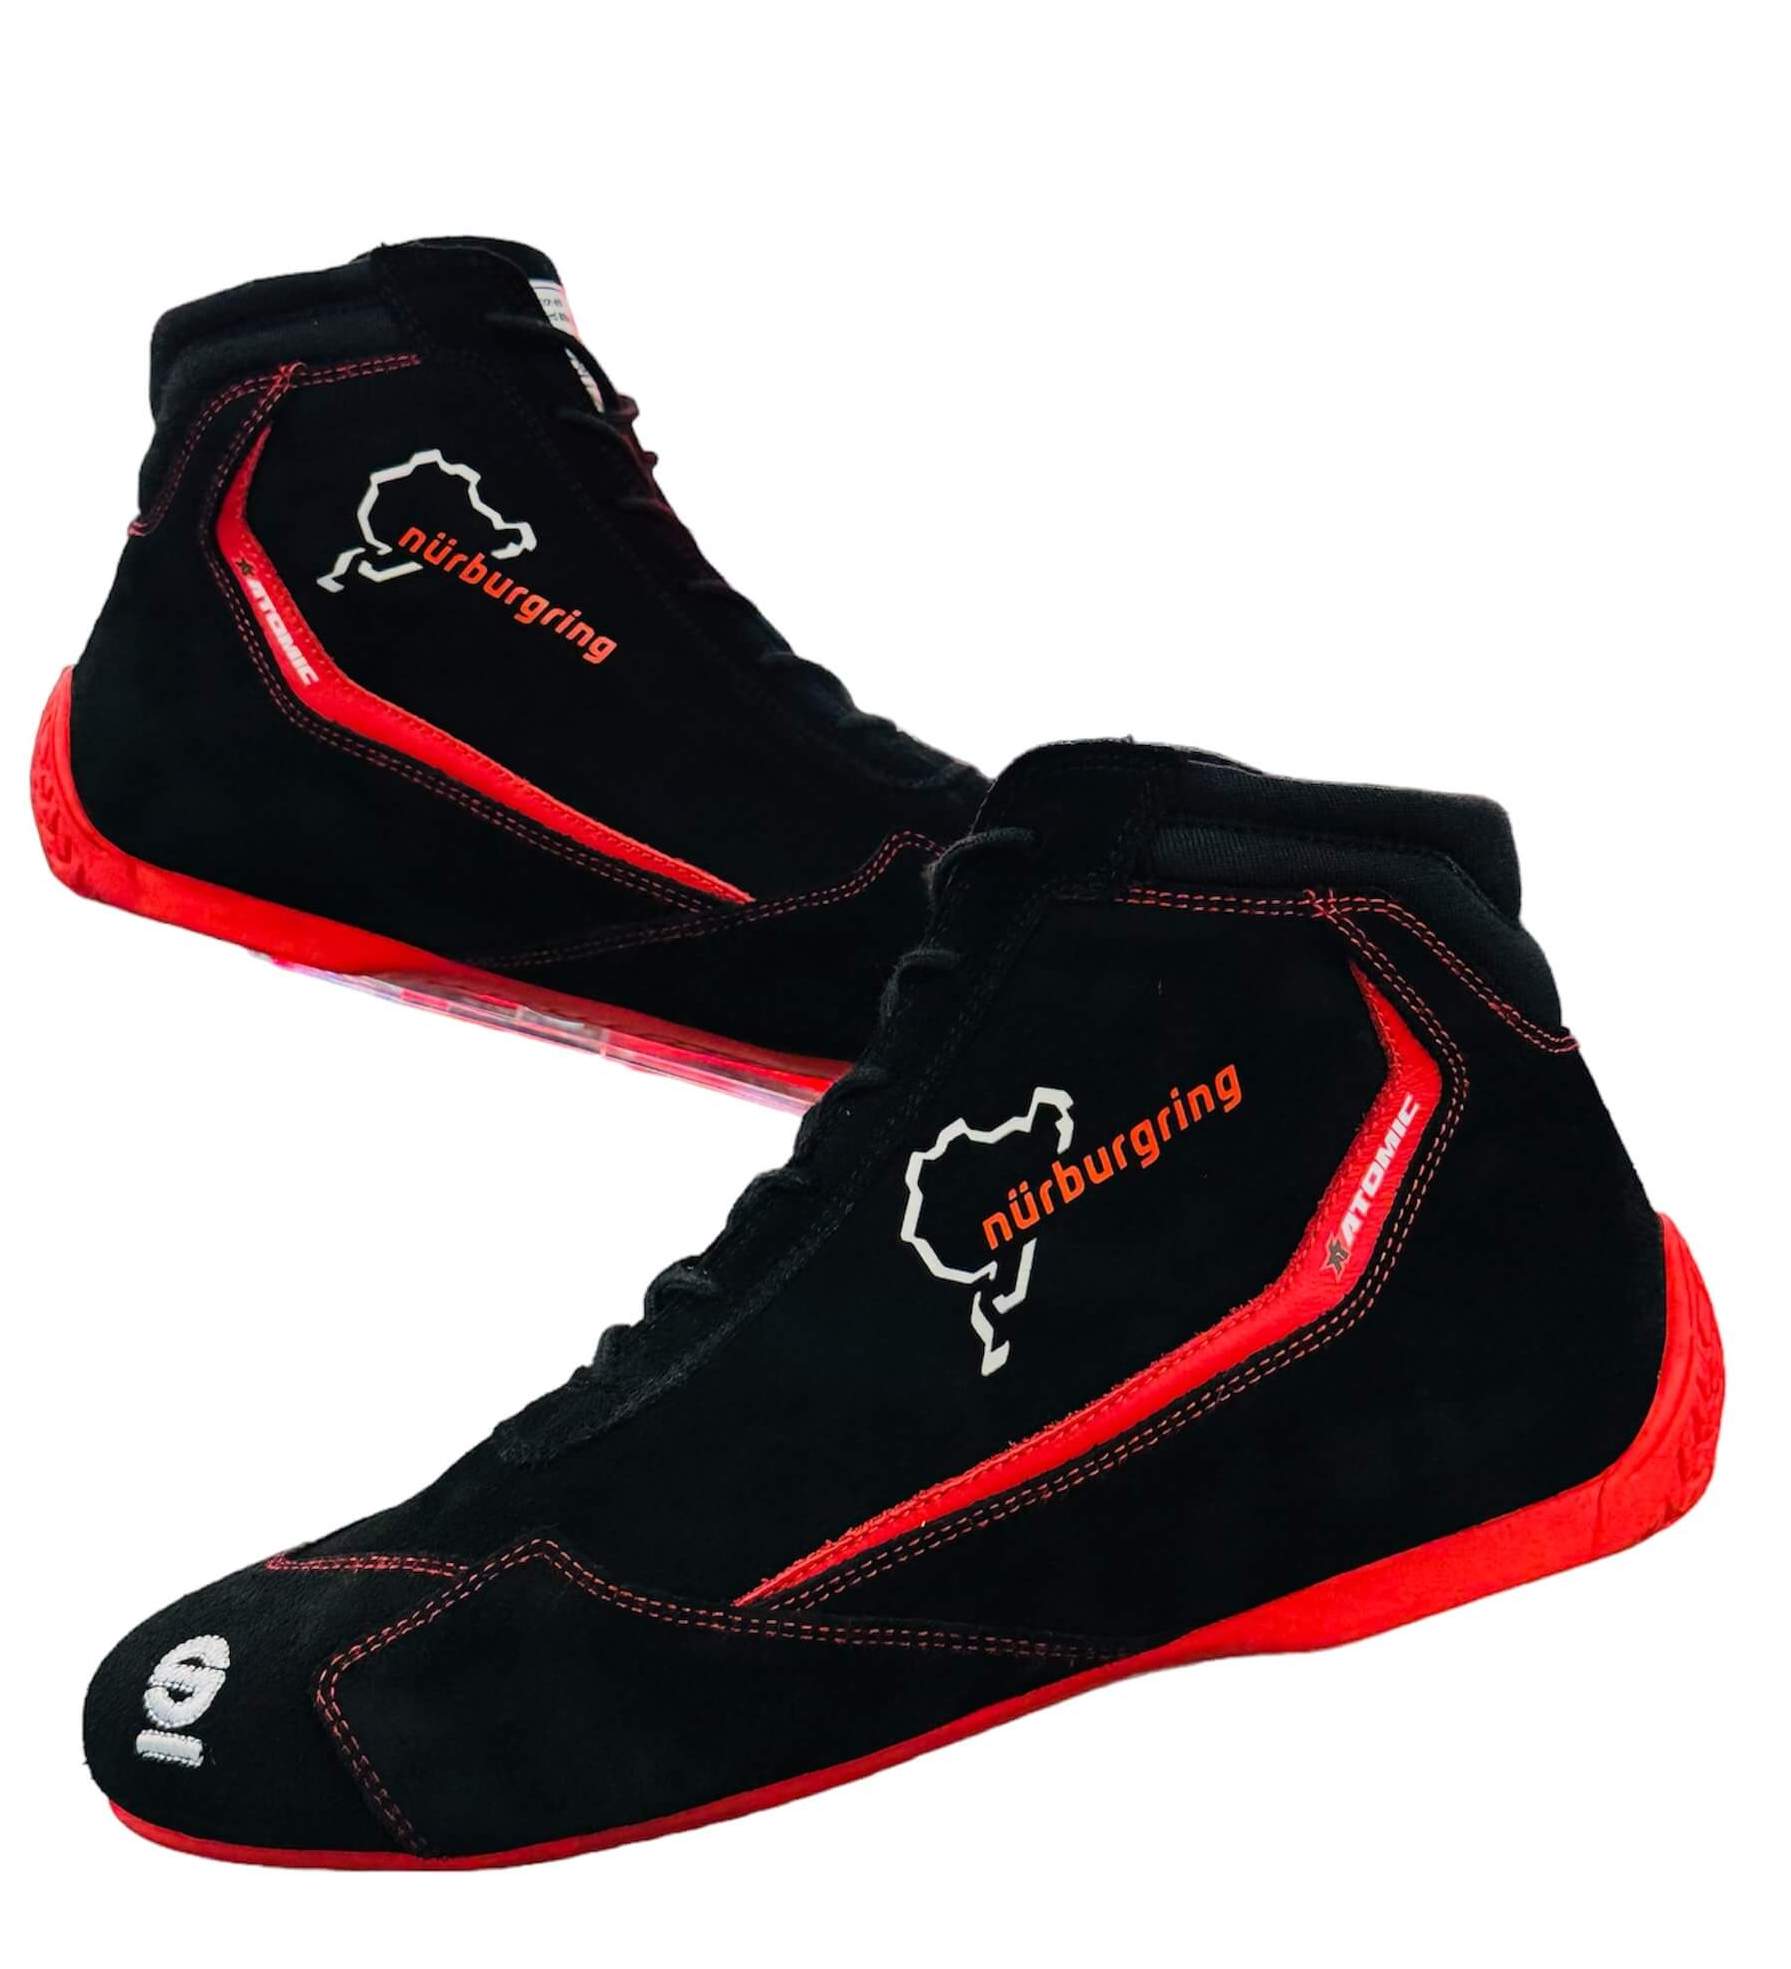 SPARCO 001295SP_NBR43 Shoes Slalom Nurburgring Edition black/red Size 43 Photo-3 